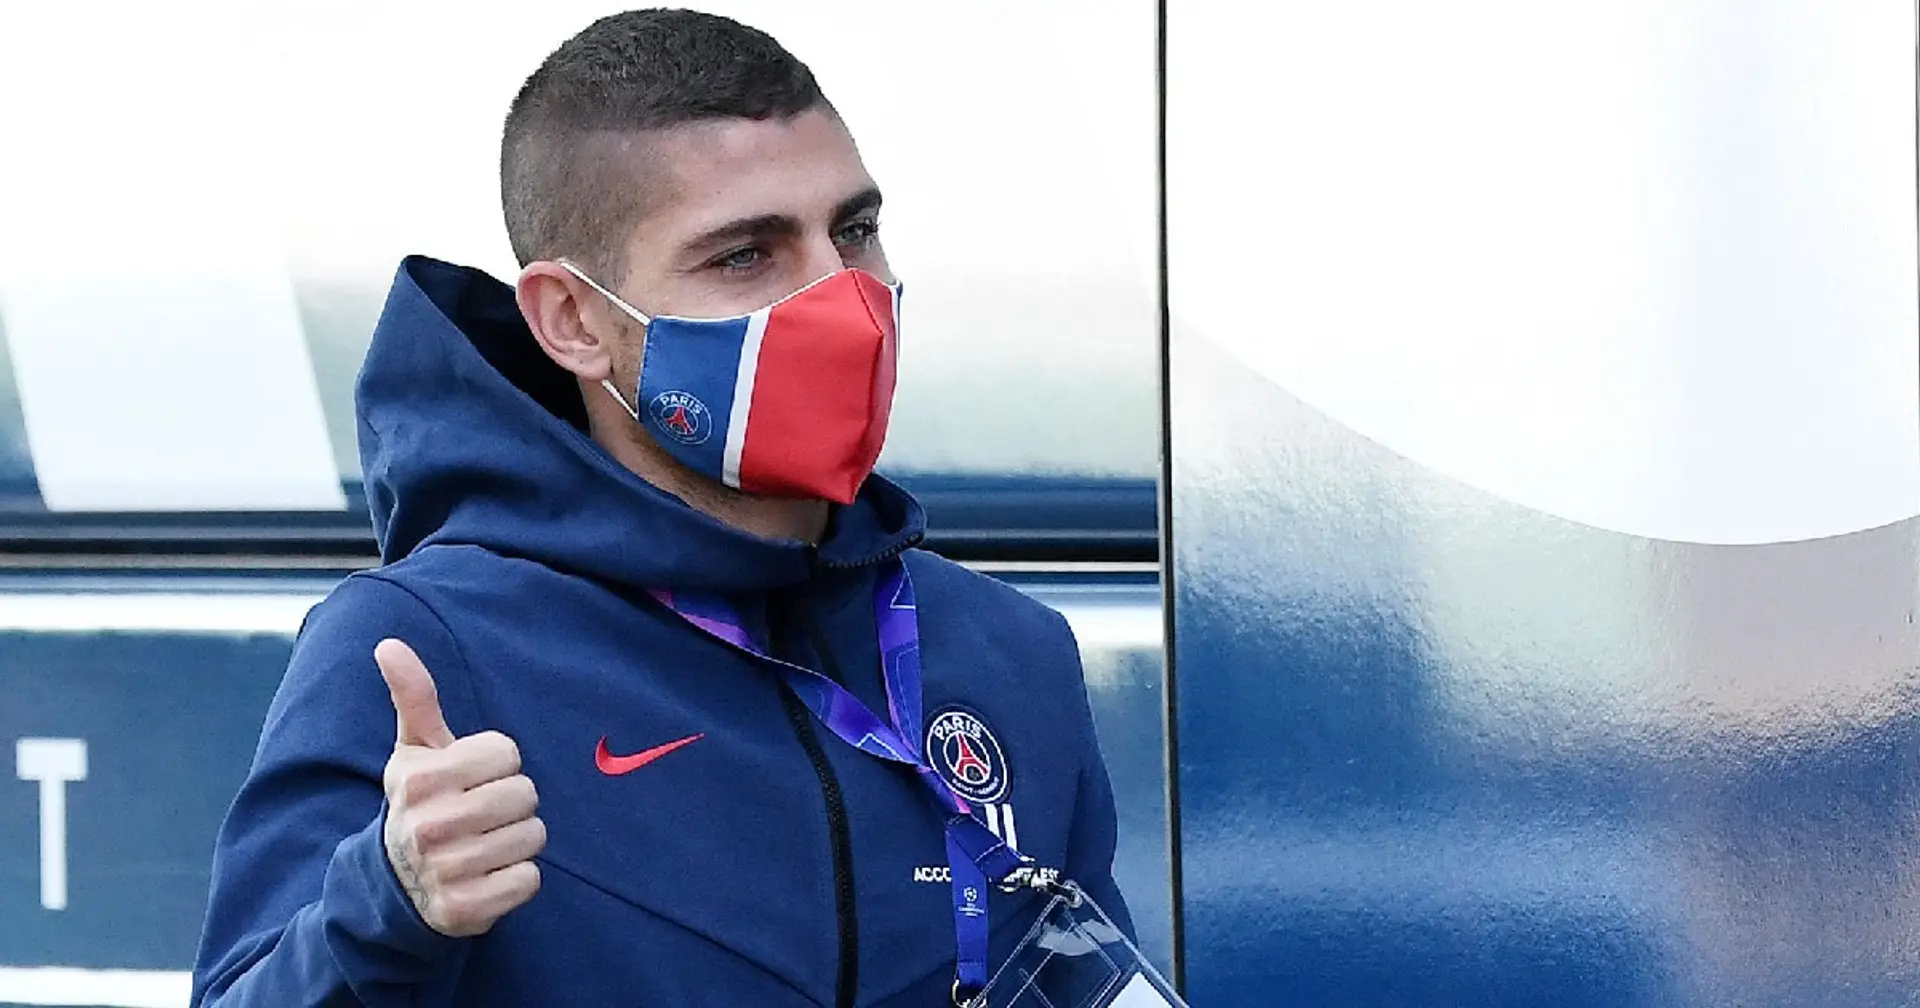 PSG's Marco Verratti emerges as surprise Man United target - he could cost more than Amrabat